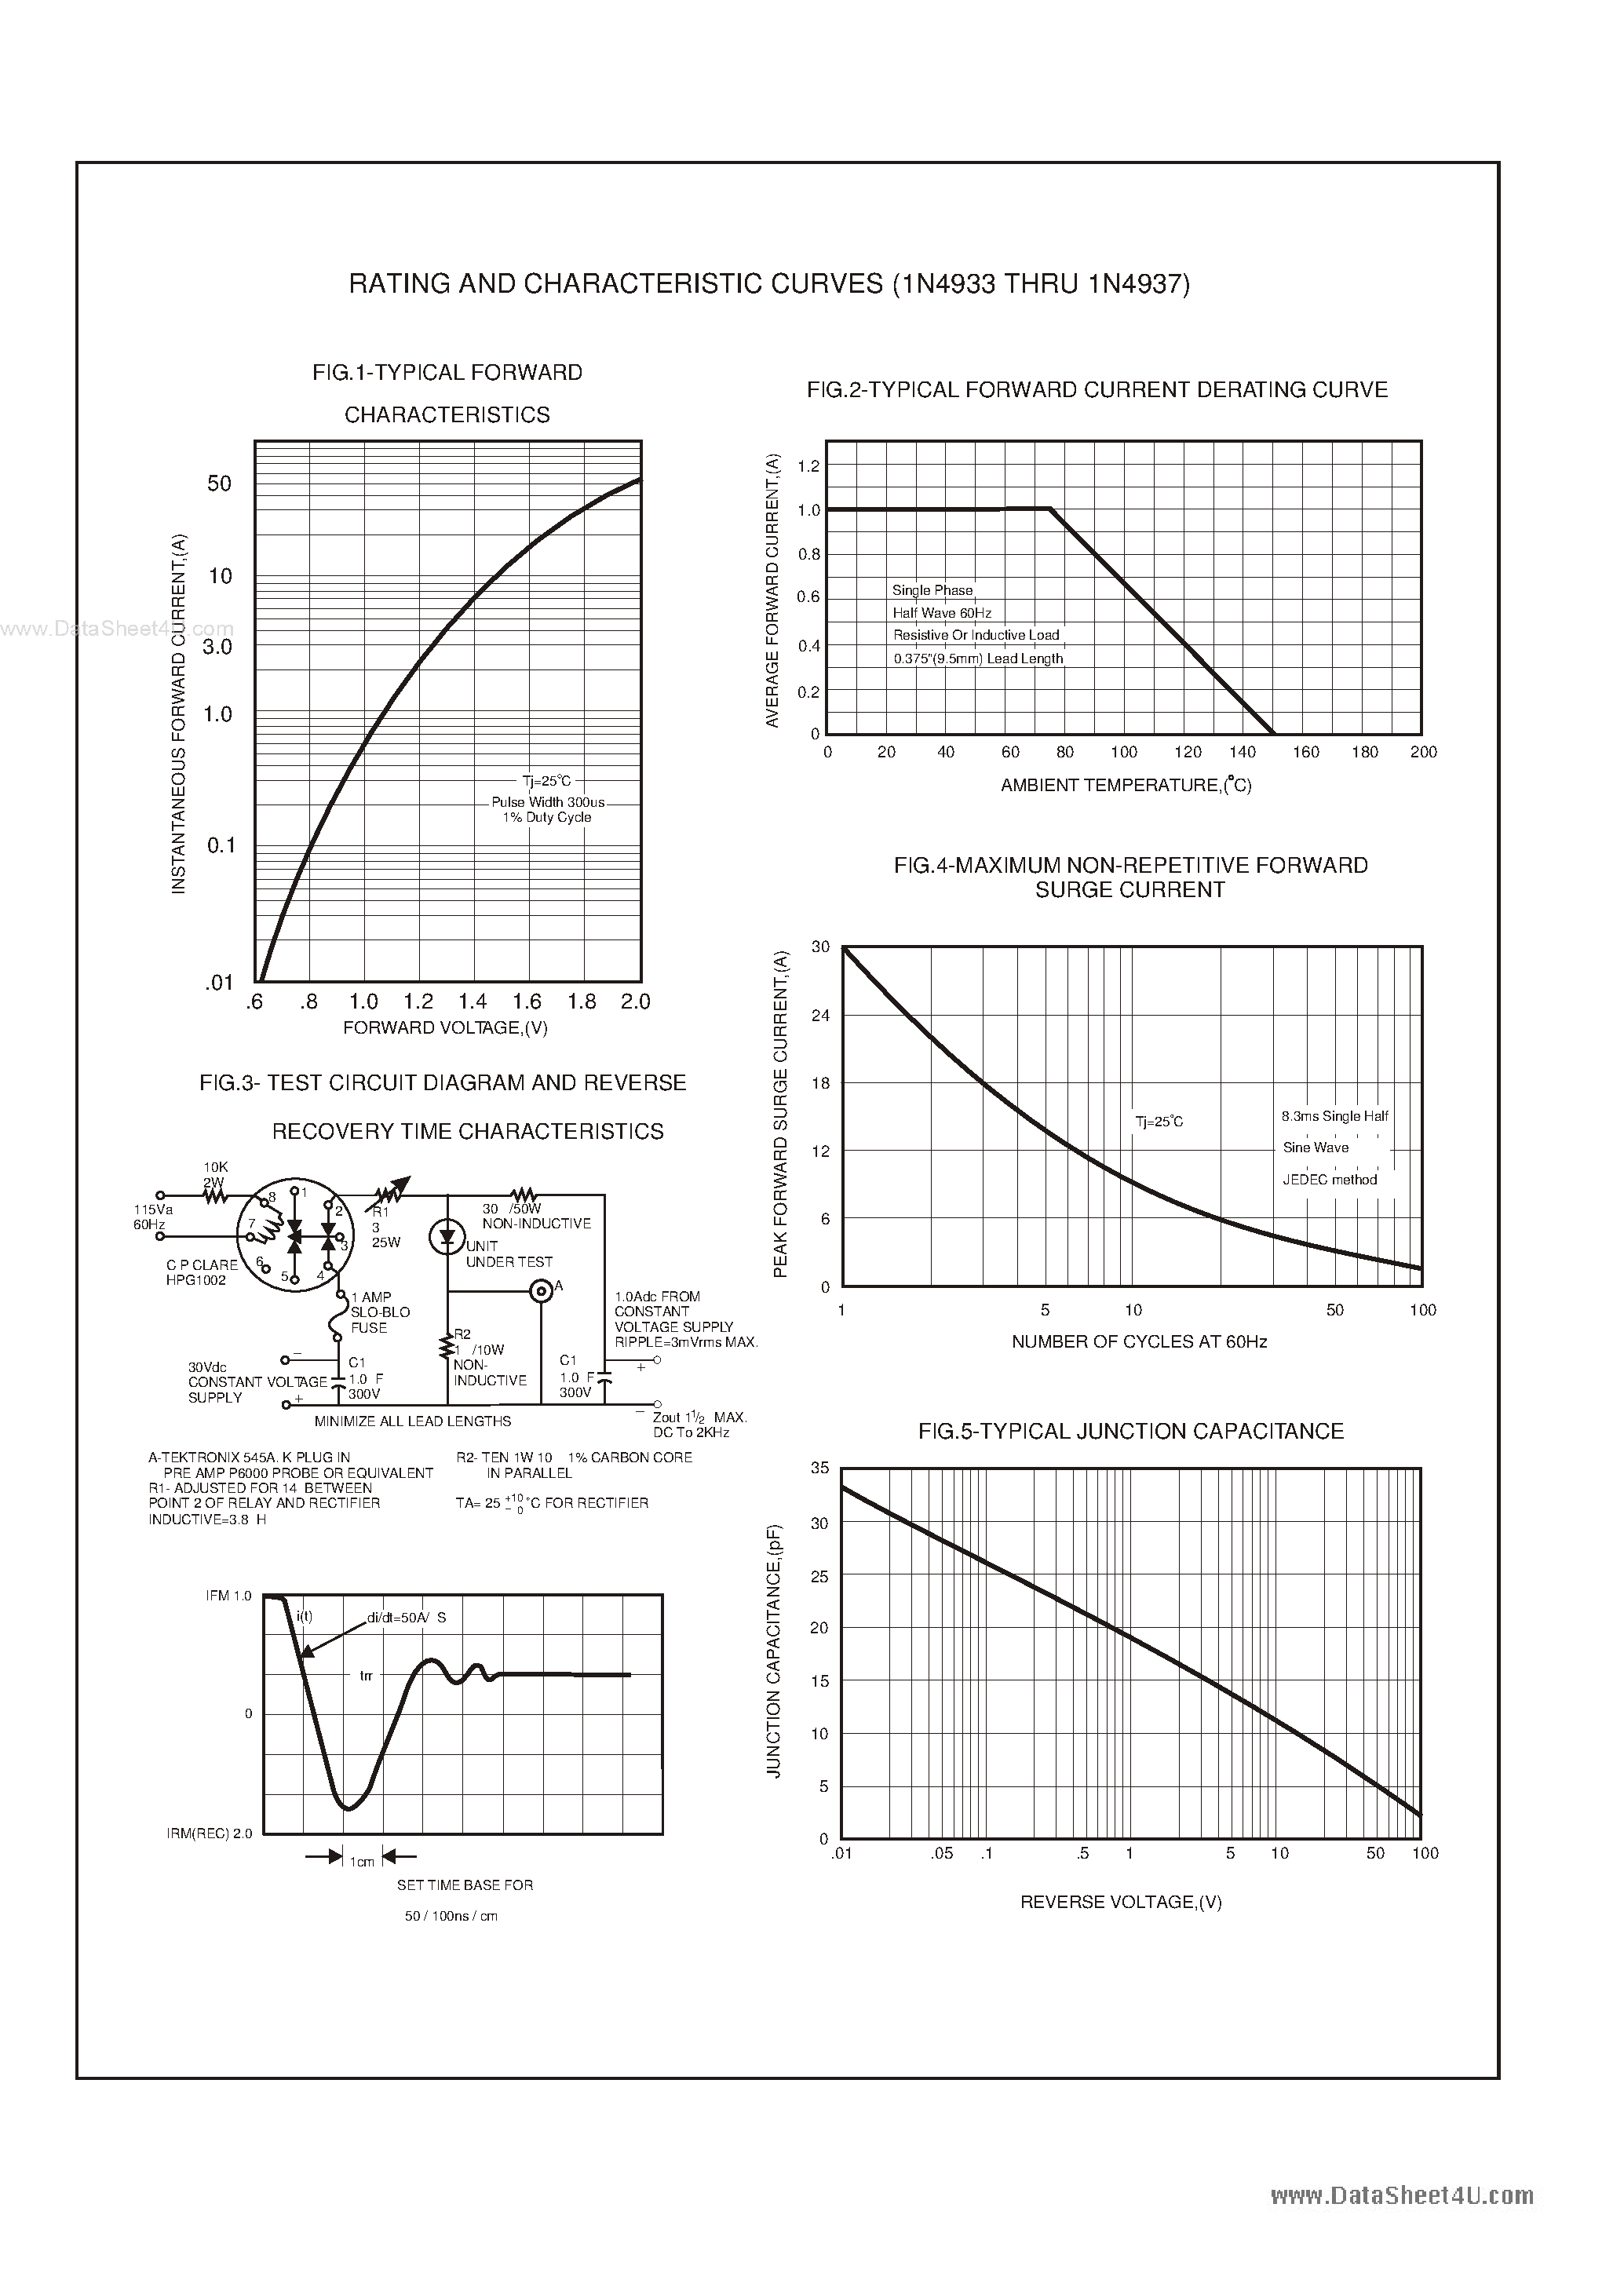 Datasheet IN4933 - (IN4933 - IN4937) 1.0 AMP FAST RECOVERY RECTIFIERS page 2